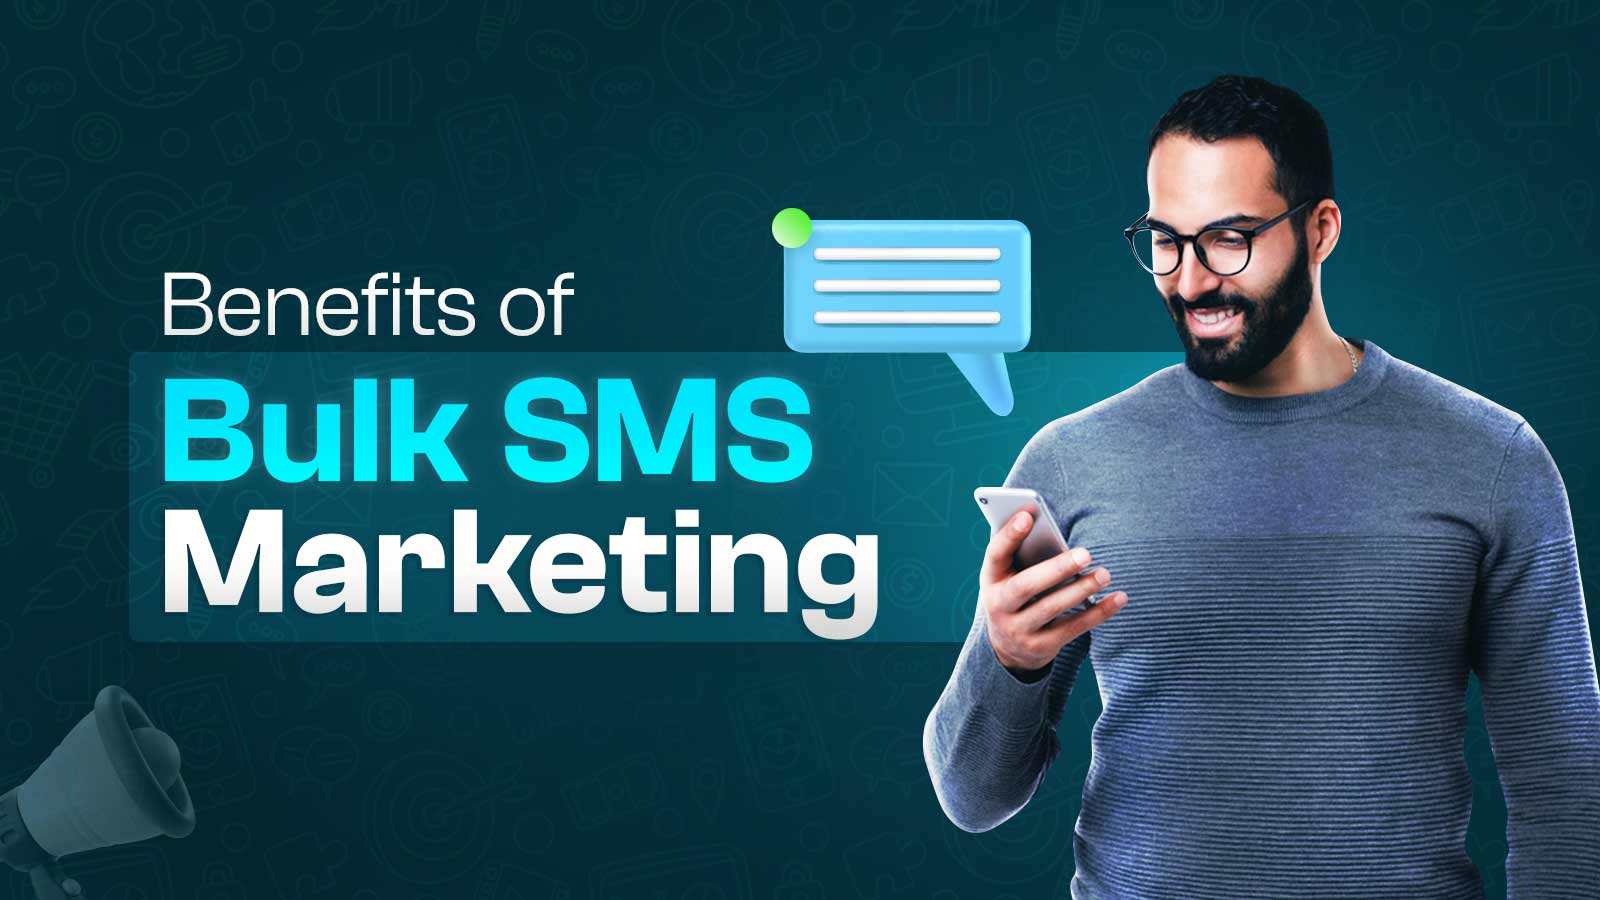 8 Key Benefits Of Bulk SMS Marketing For All Types Of Business